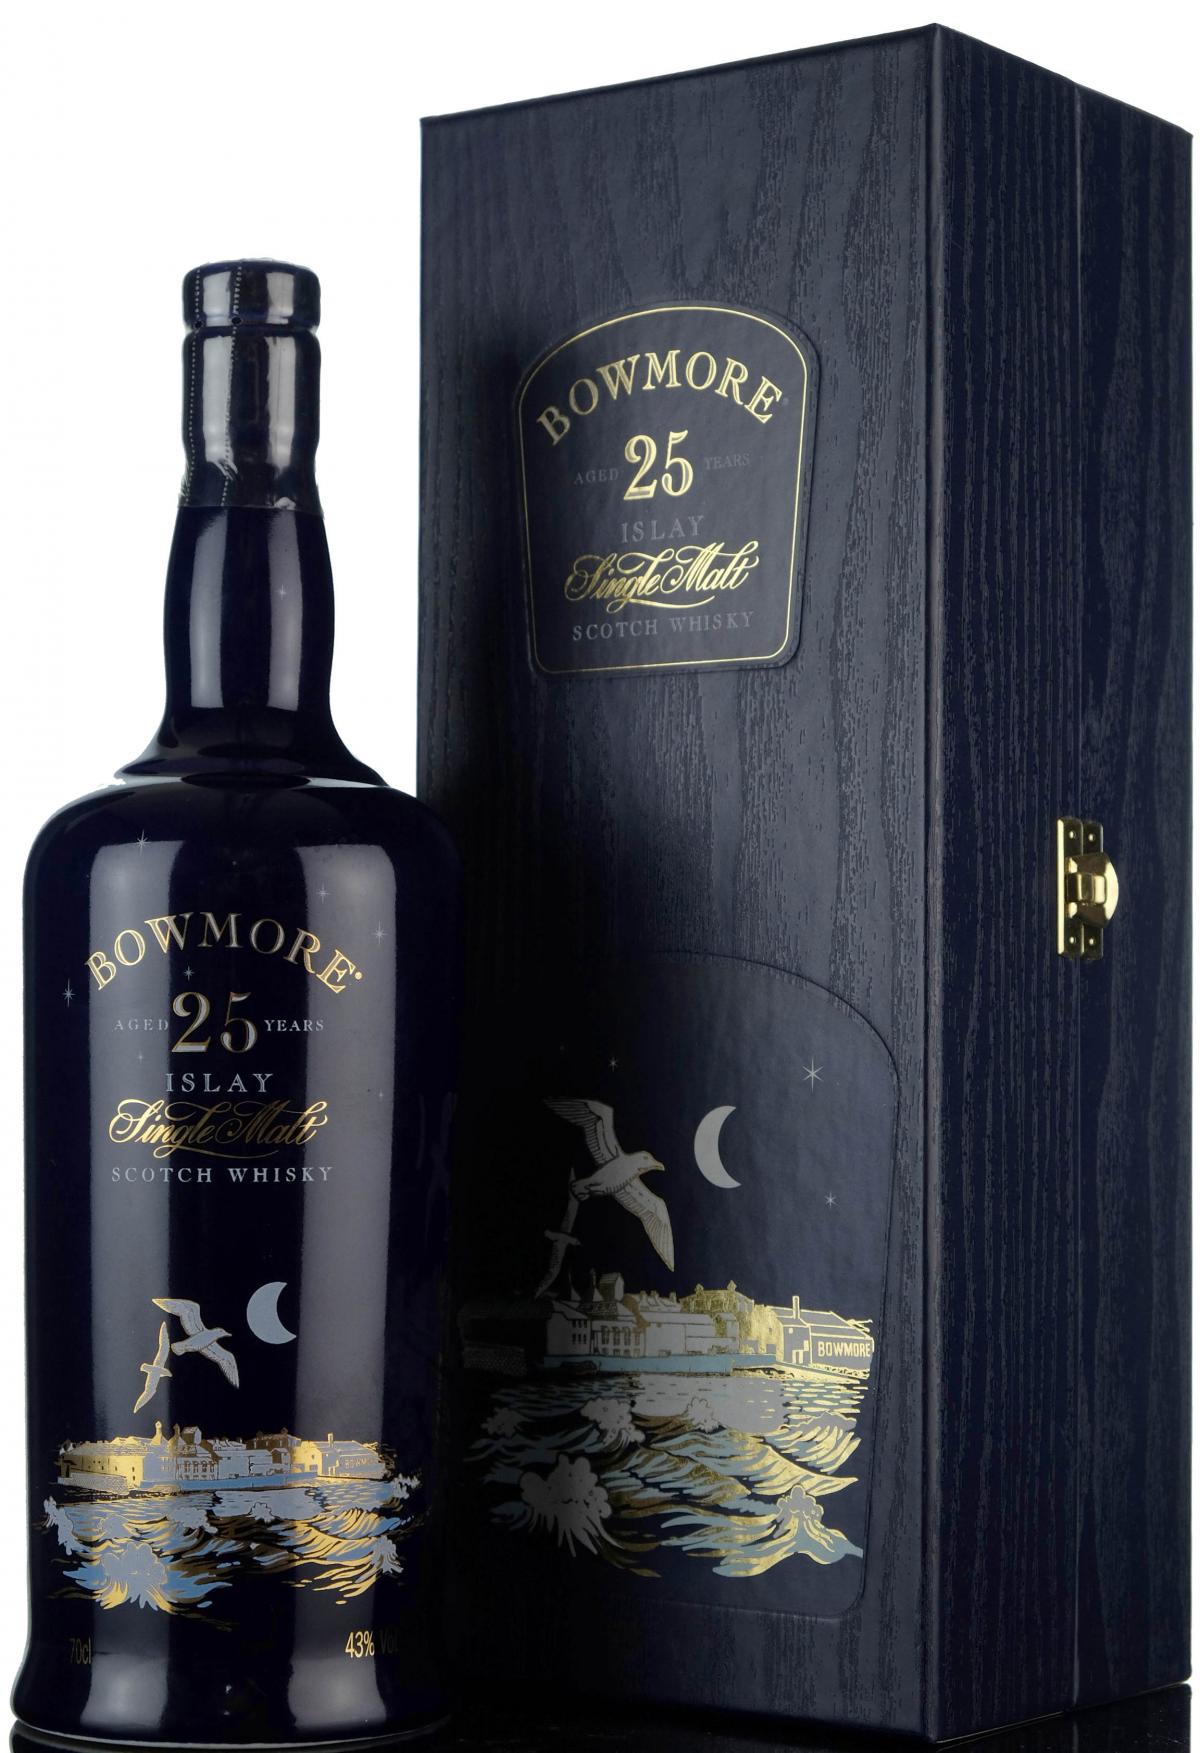 Bowmore 25 Year Old - Seagulls